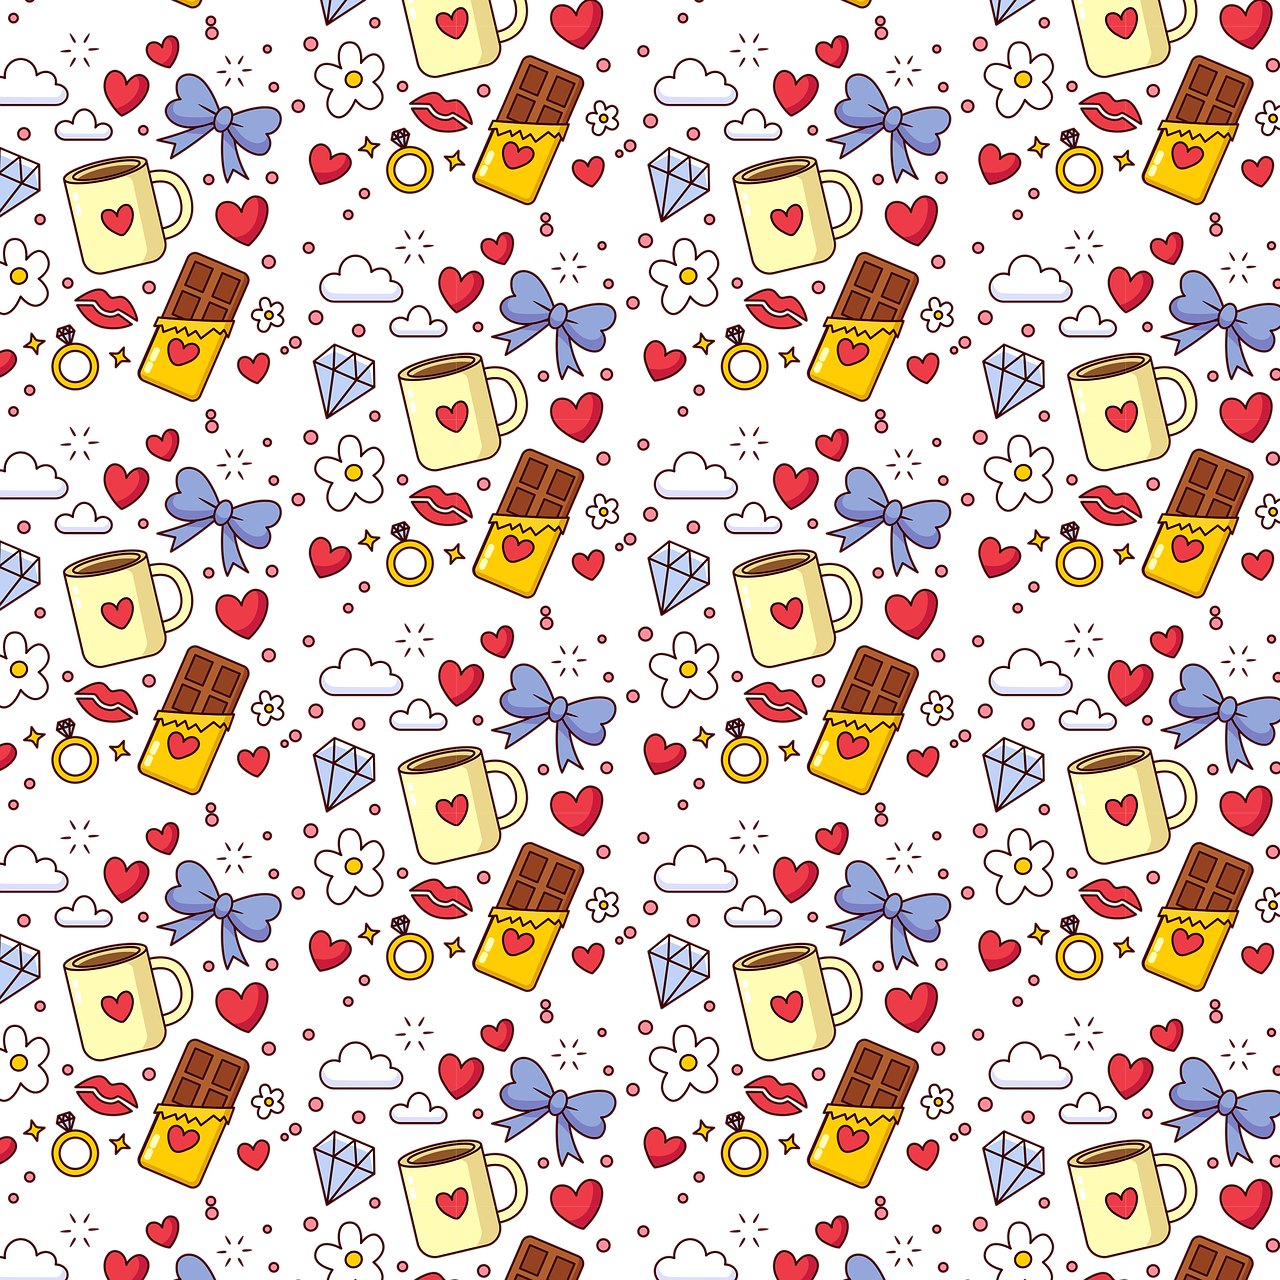 a pattern of coffee mugs and hearts on a black background, tumblr, 🪔 🎨;🌞🌄, flowers background, sweets, checkered pattern